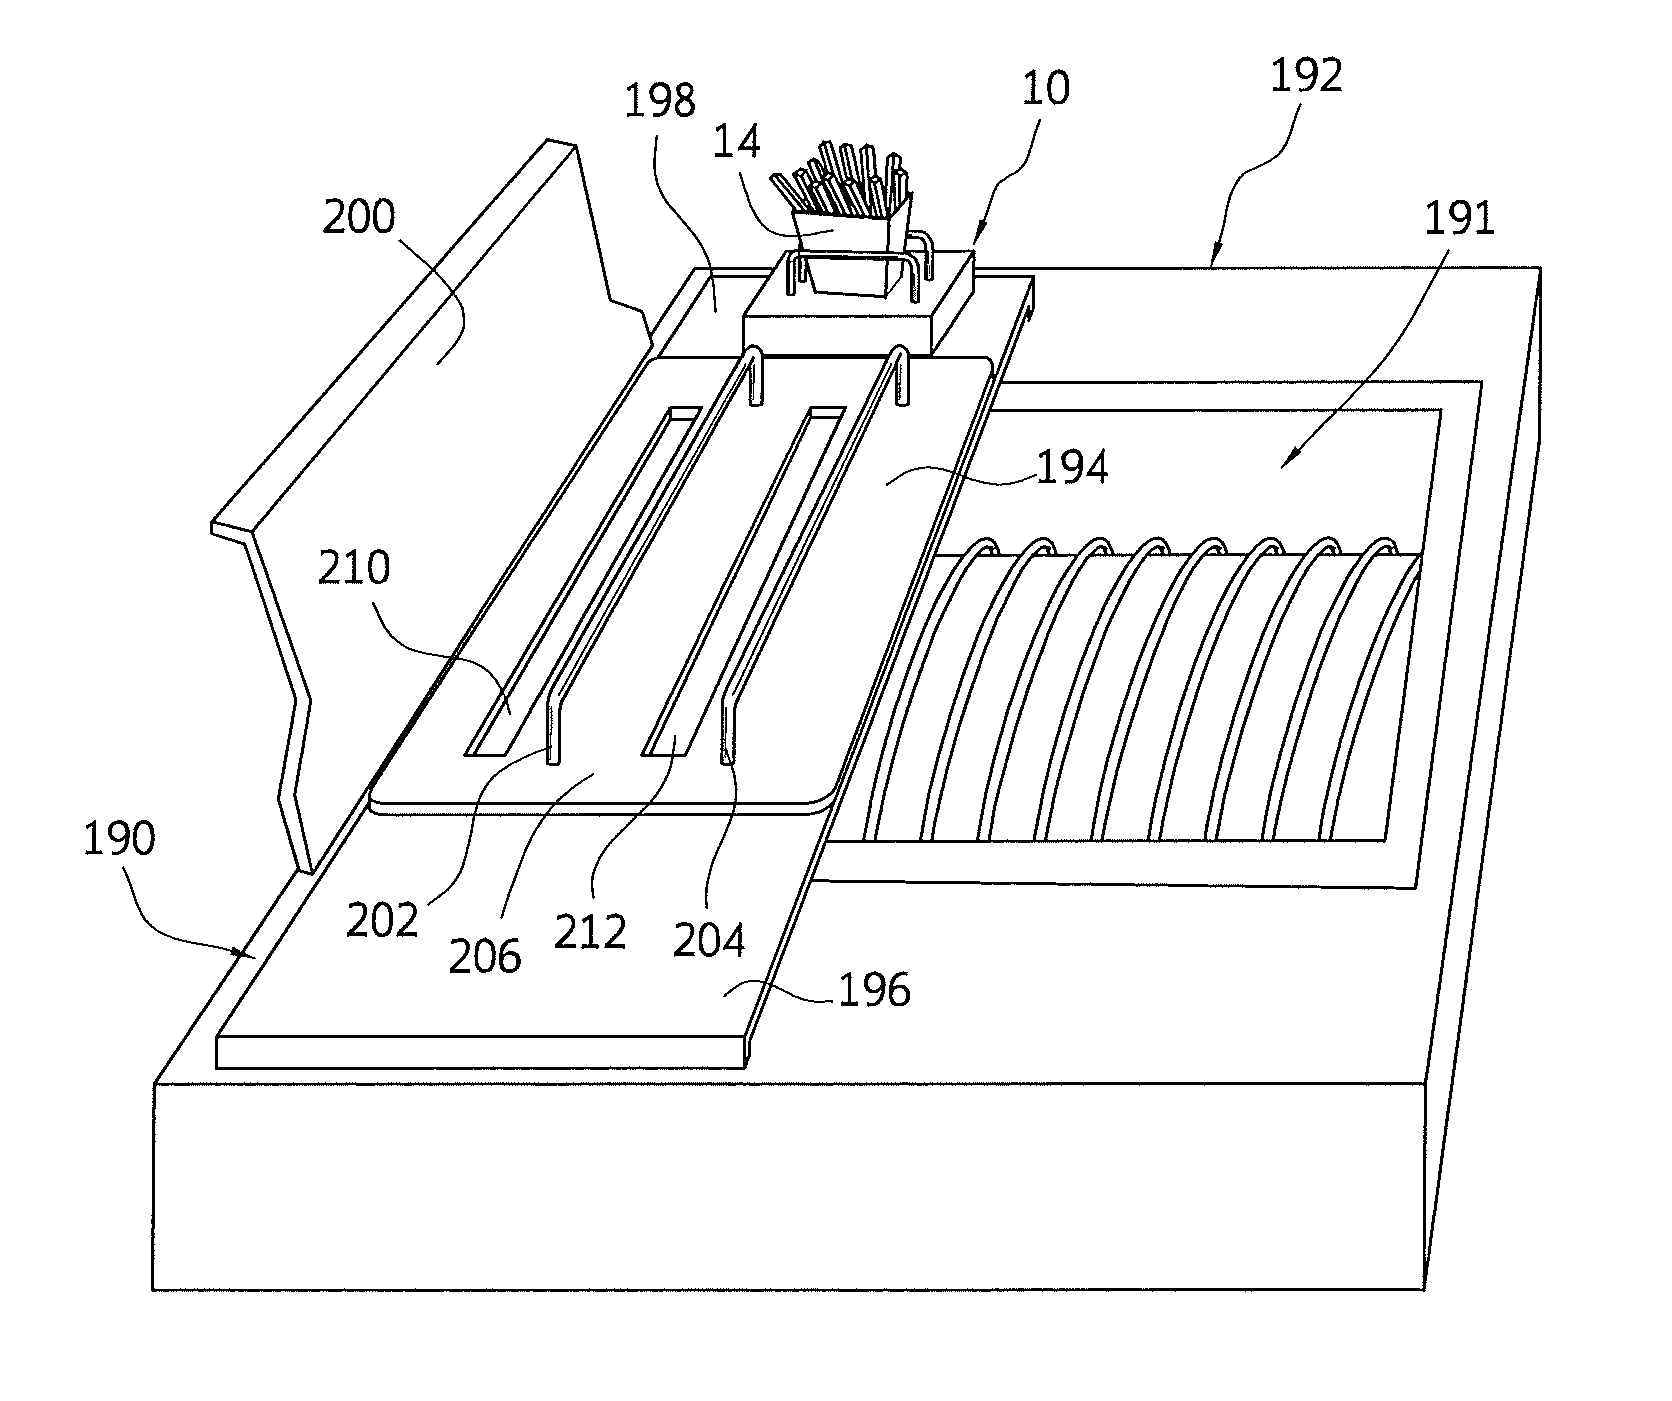 Method for using a ribbon scale for adjusting the amount of french fries in a bag in a restaurant